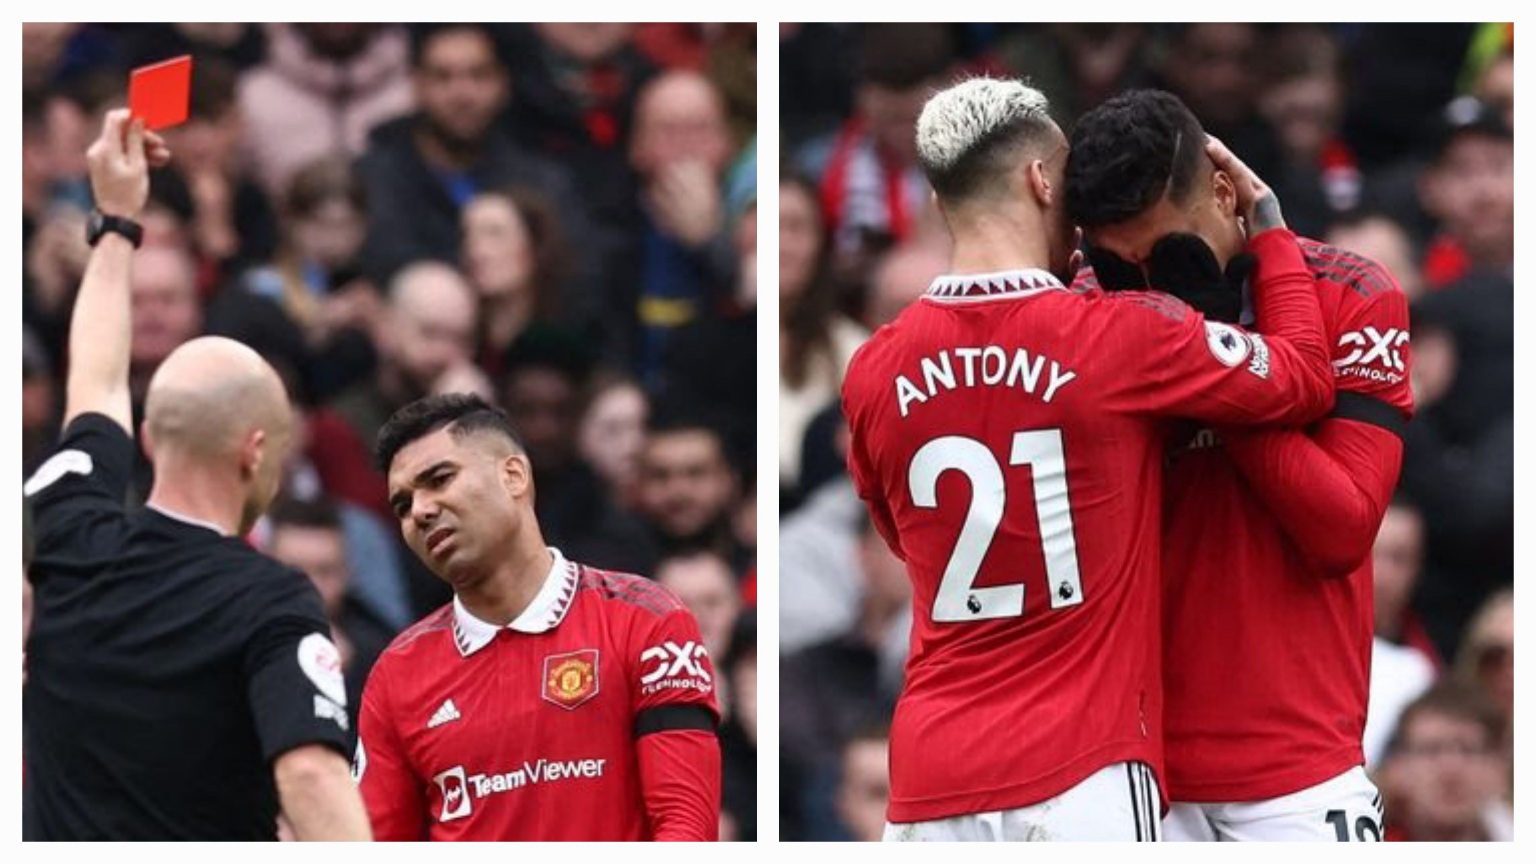 Casemiro gets a red card in Manchester United and Southampton English Premier League match